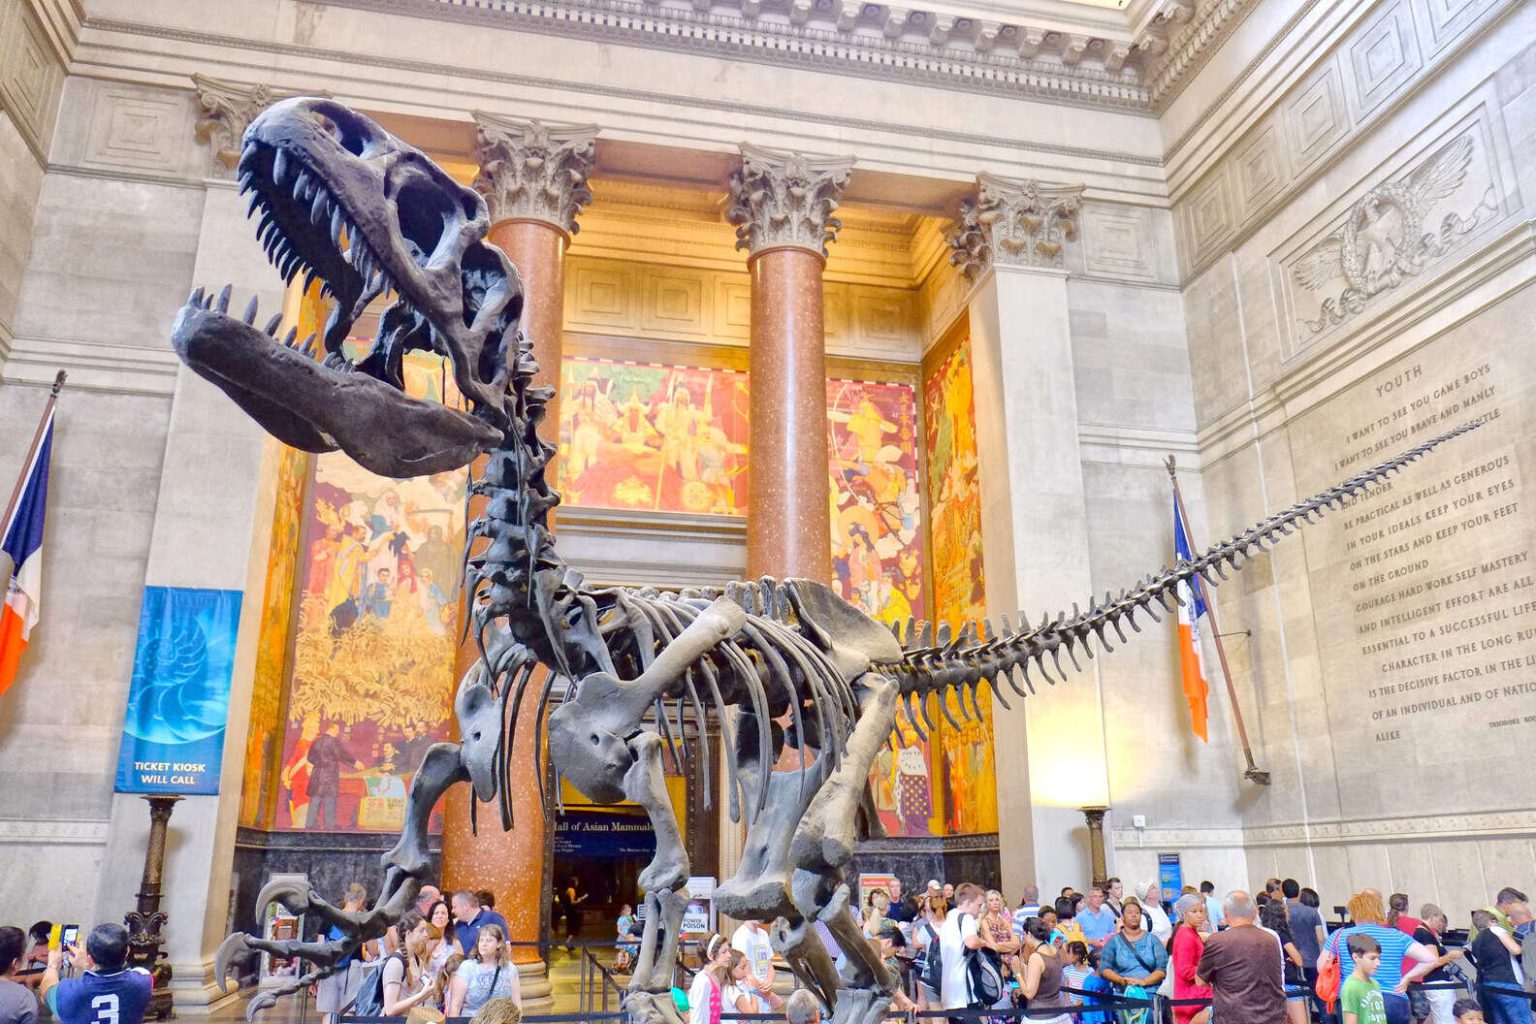 fun museums to visit in nyc